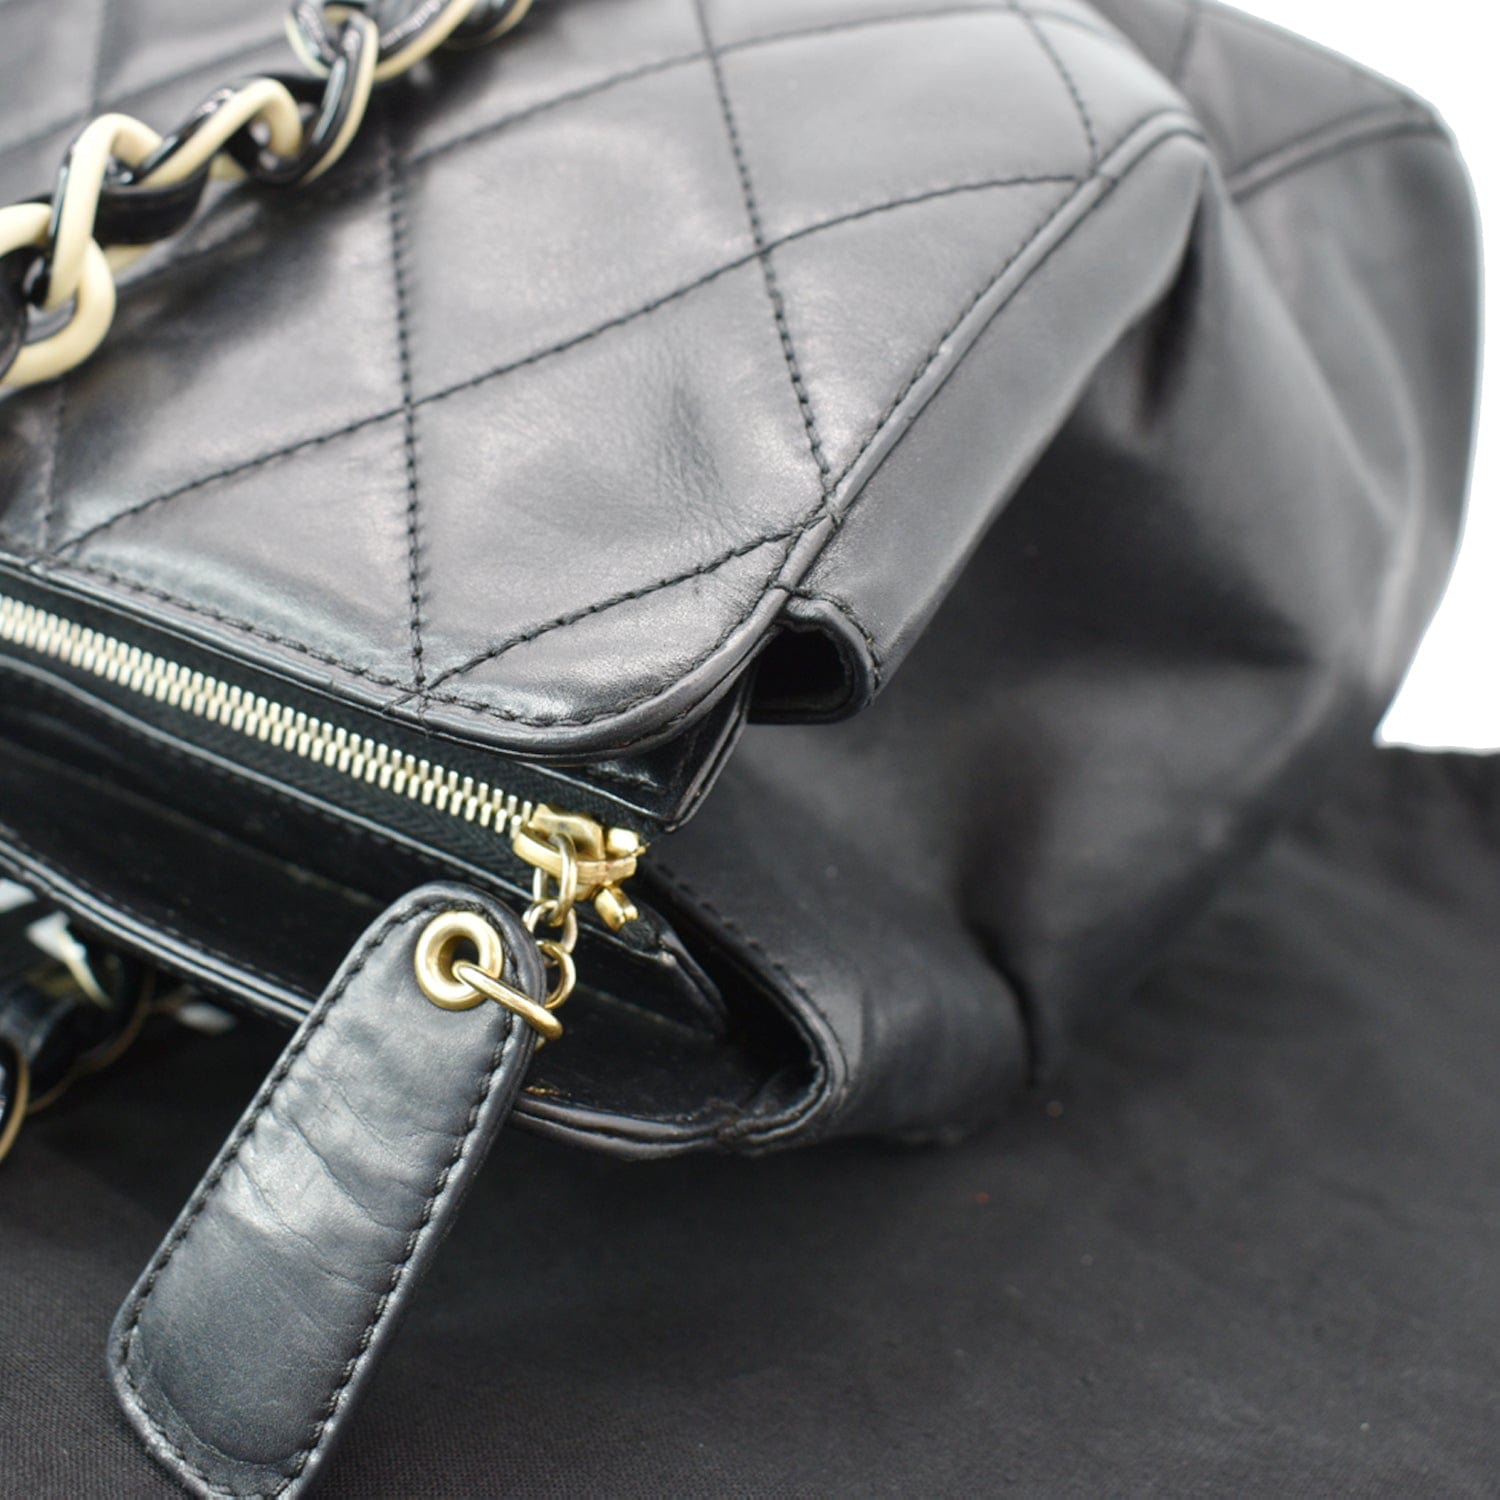 Chanel Classic Flap Repair - The Restory - Aftercare for Luxury